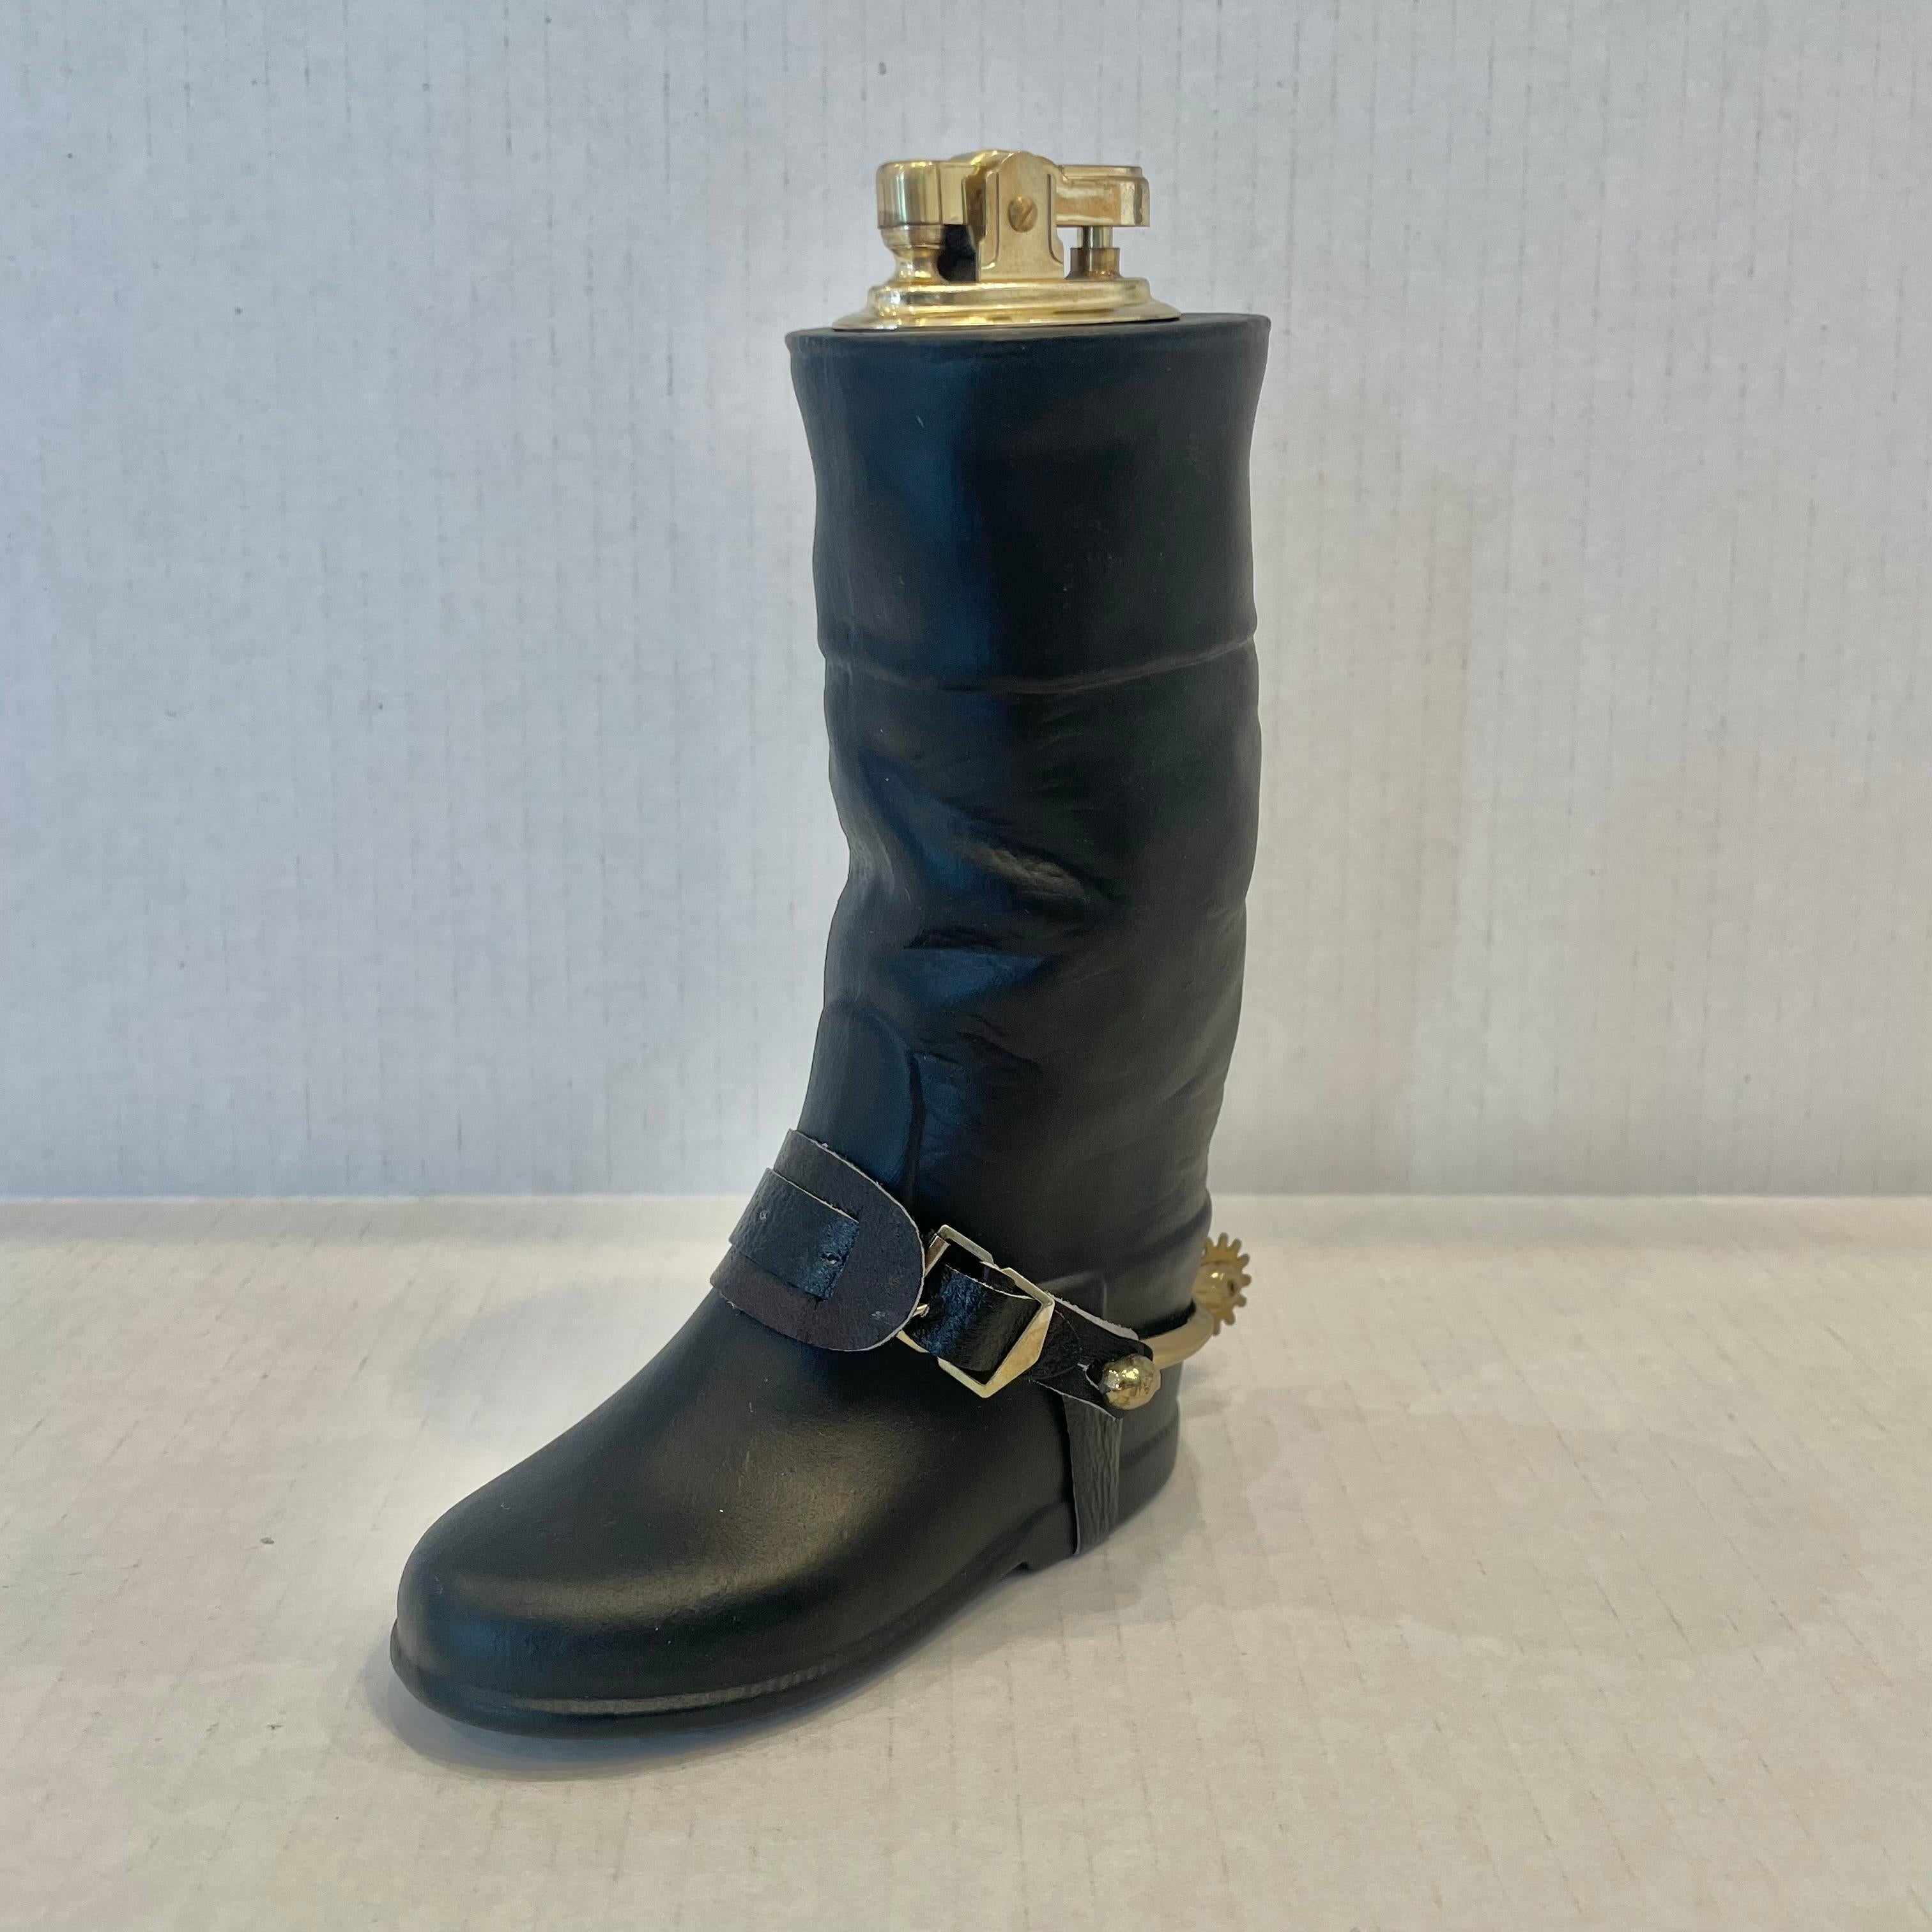 Cool vintage table lighter in the shape of an equestrian riding boot. Made completely of ceramic painted in a matte black with a hollow body. Beautiful gold spur and leather accent details. Cool tobacco accessory and conversation piece. Working